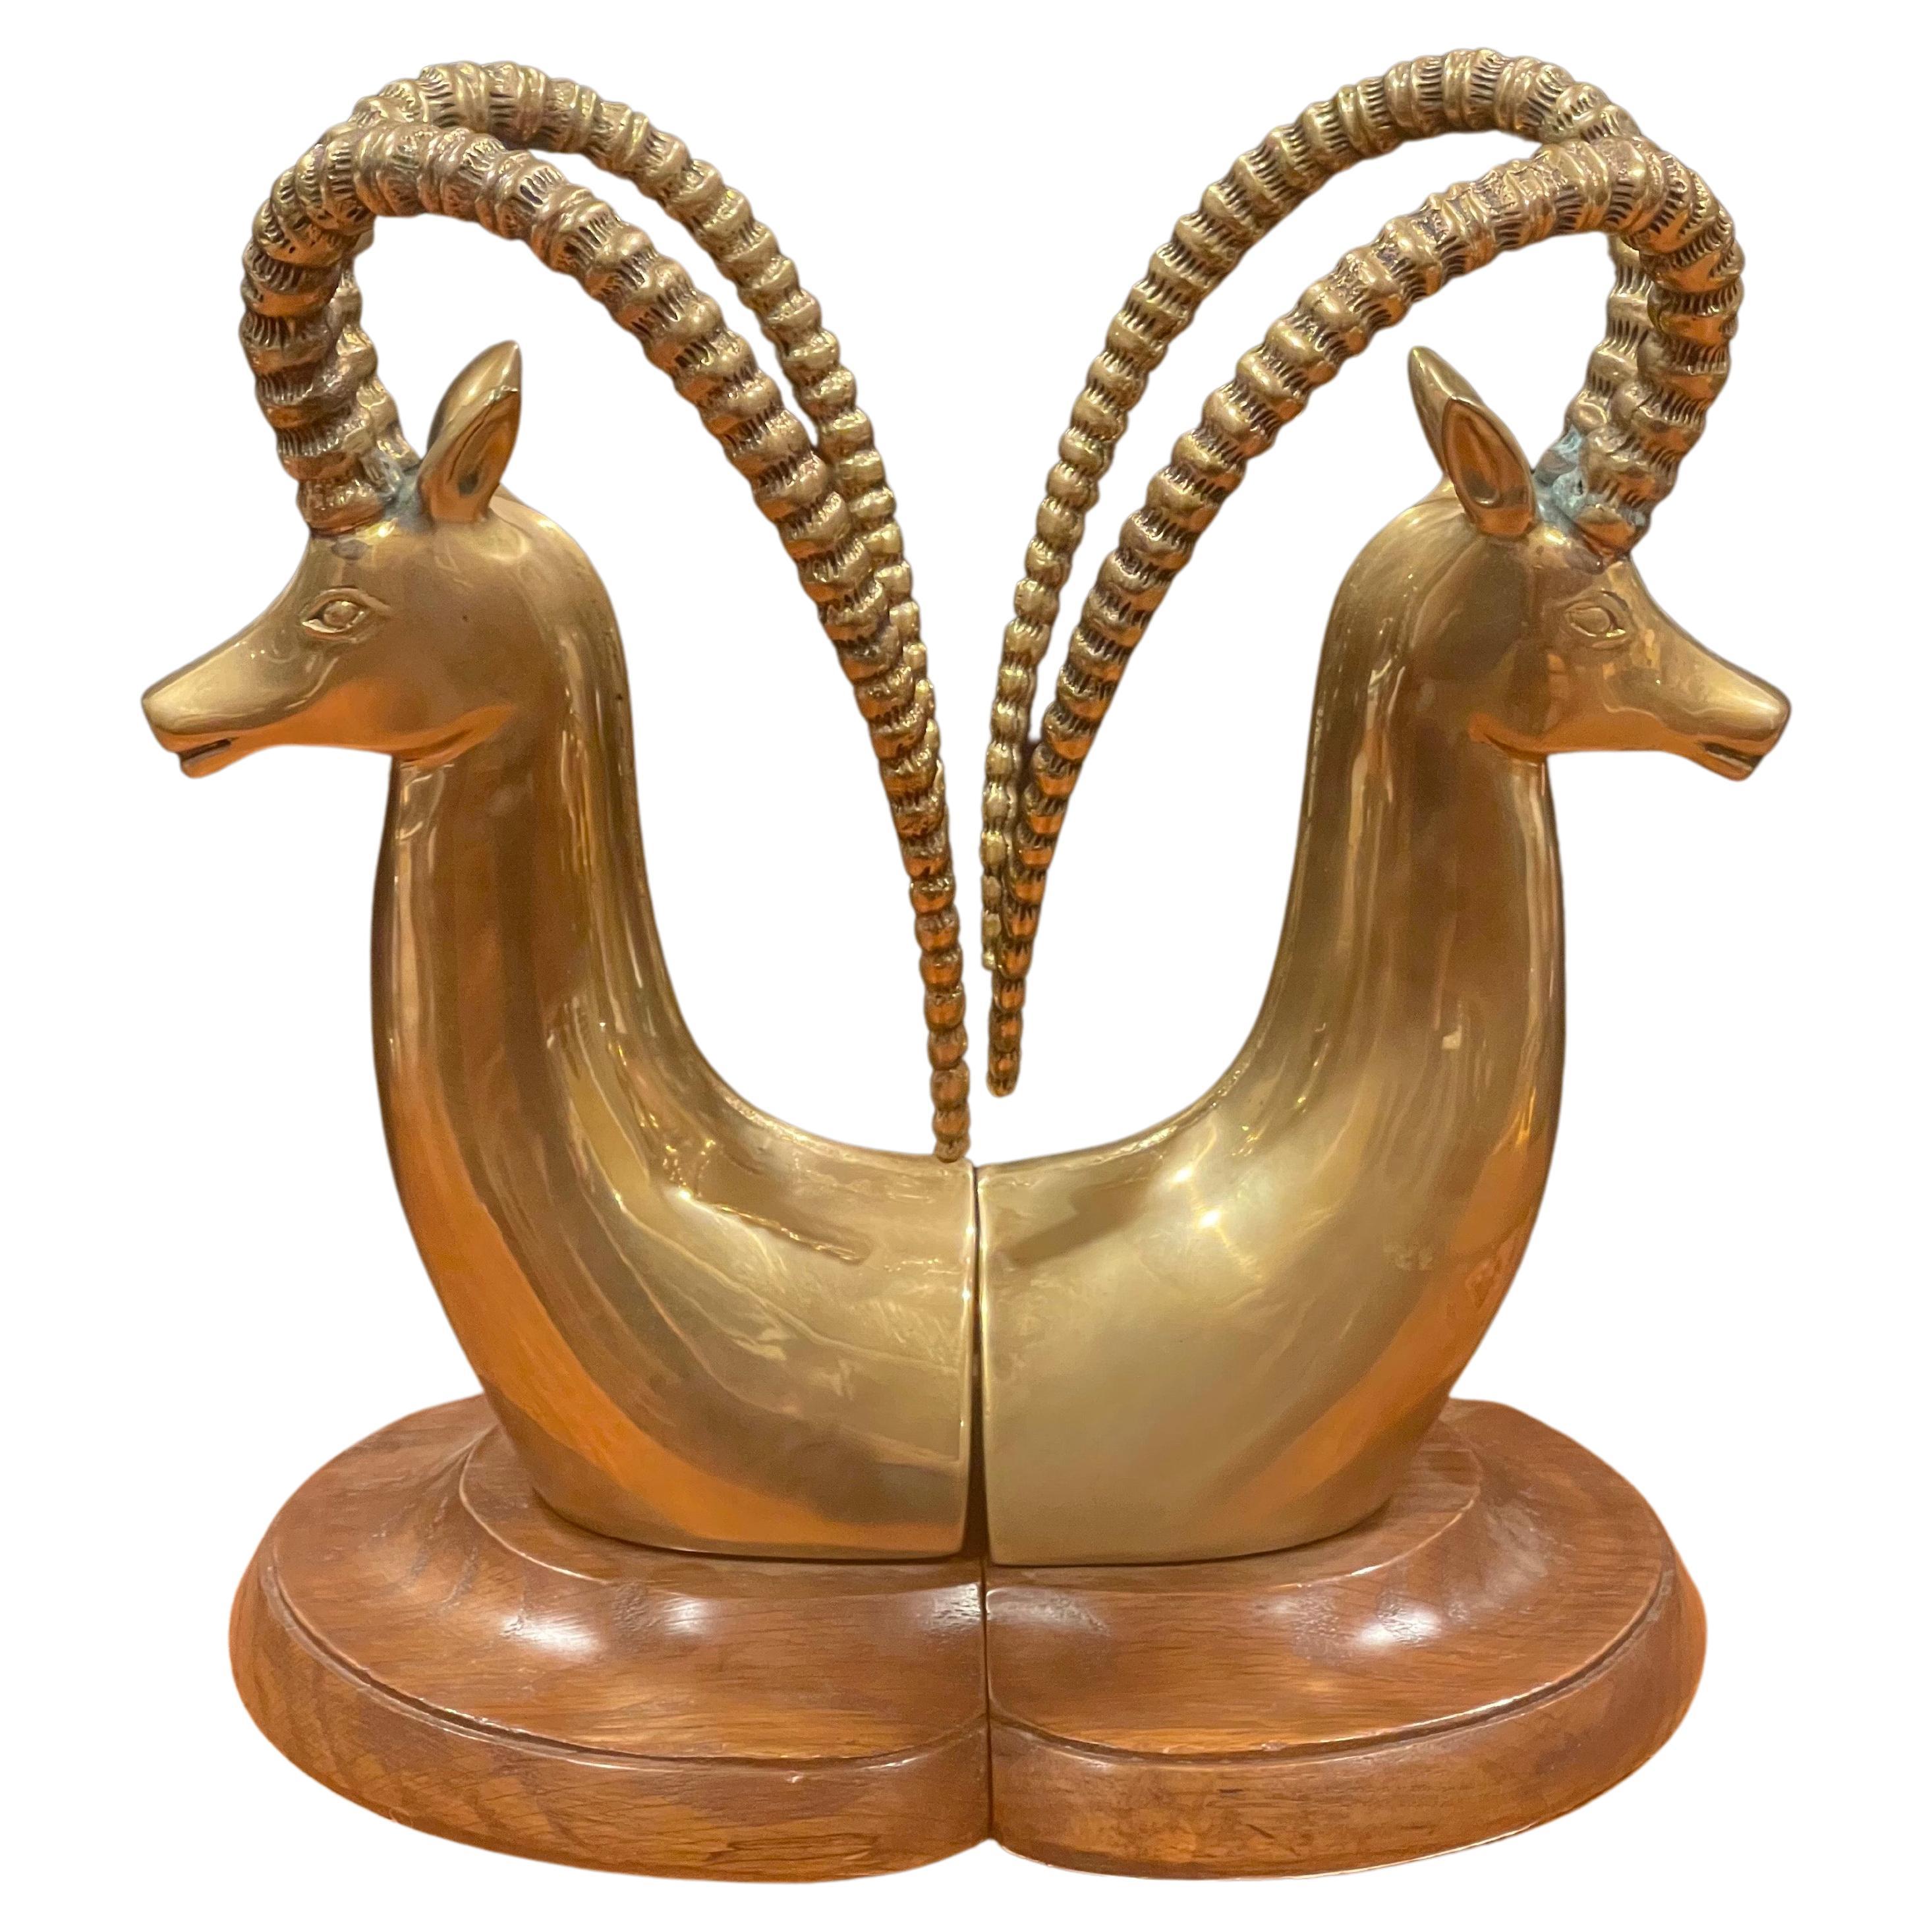 A massive pair of brass rams head bookends on walnut bases by Sarreid, circa 1970s. The bookends, which were made in Spain, are in very good condition and have a great look. They measure 10.5